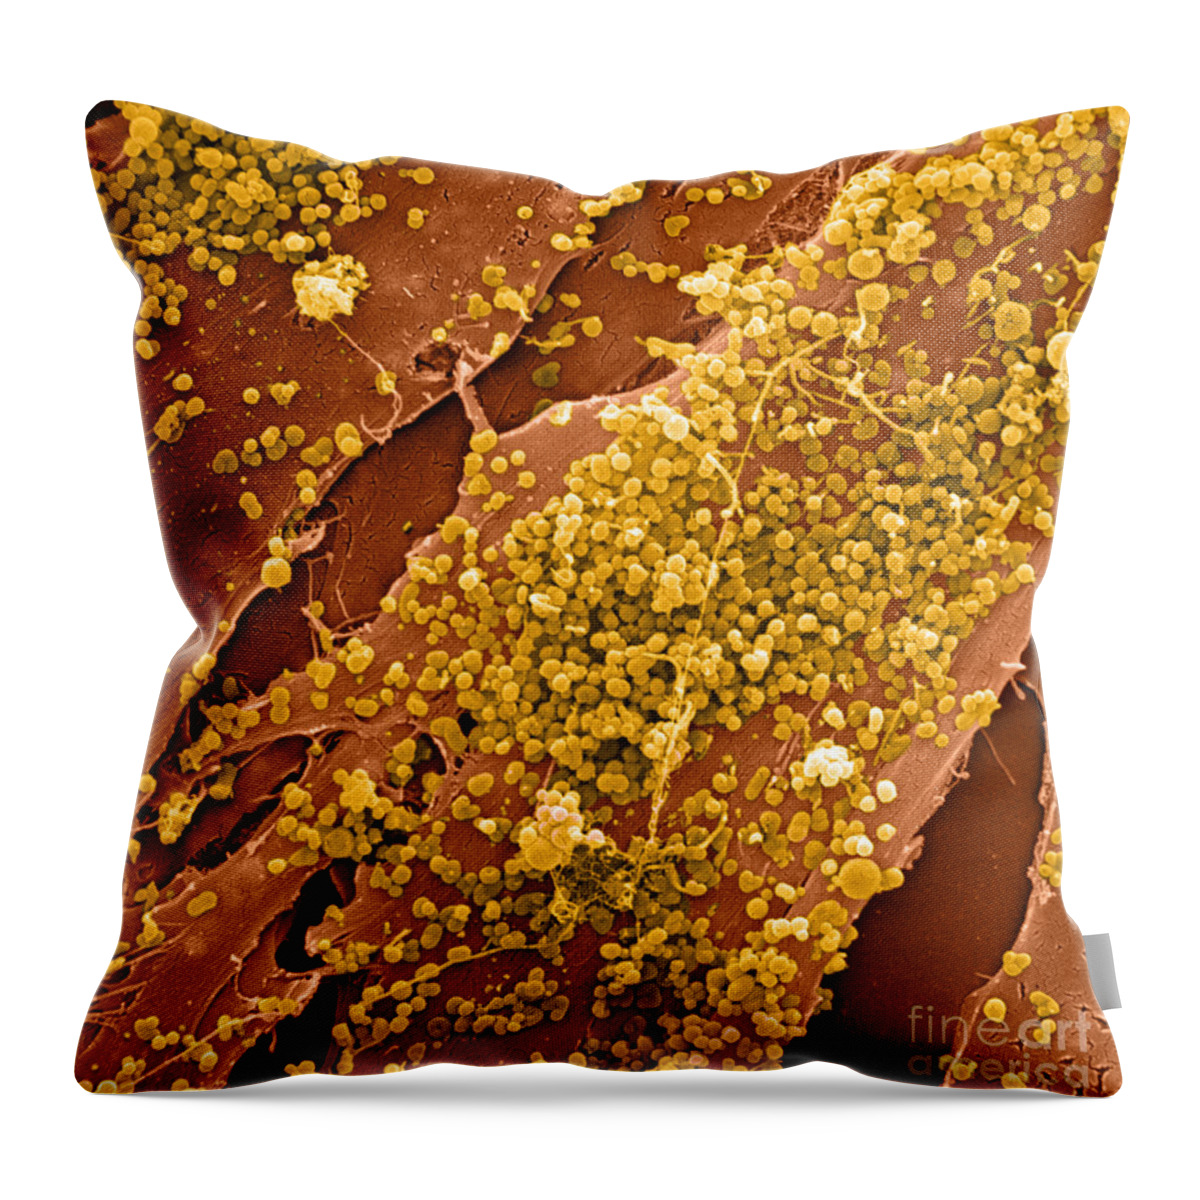 Cell Throw Pillow featuring the photograph Human Skin Cell Sem by David M. Phillips